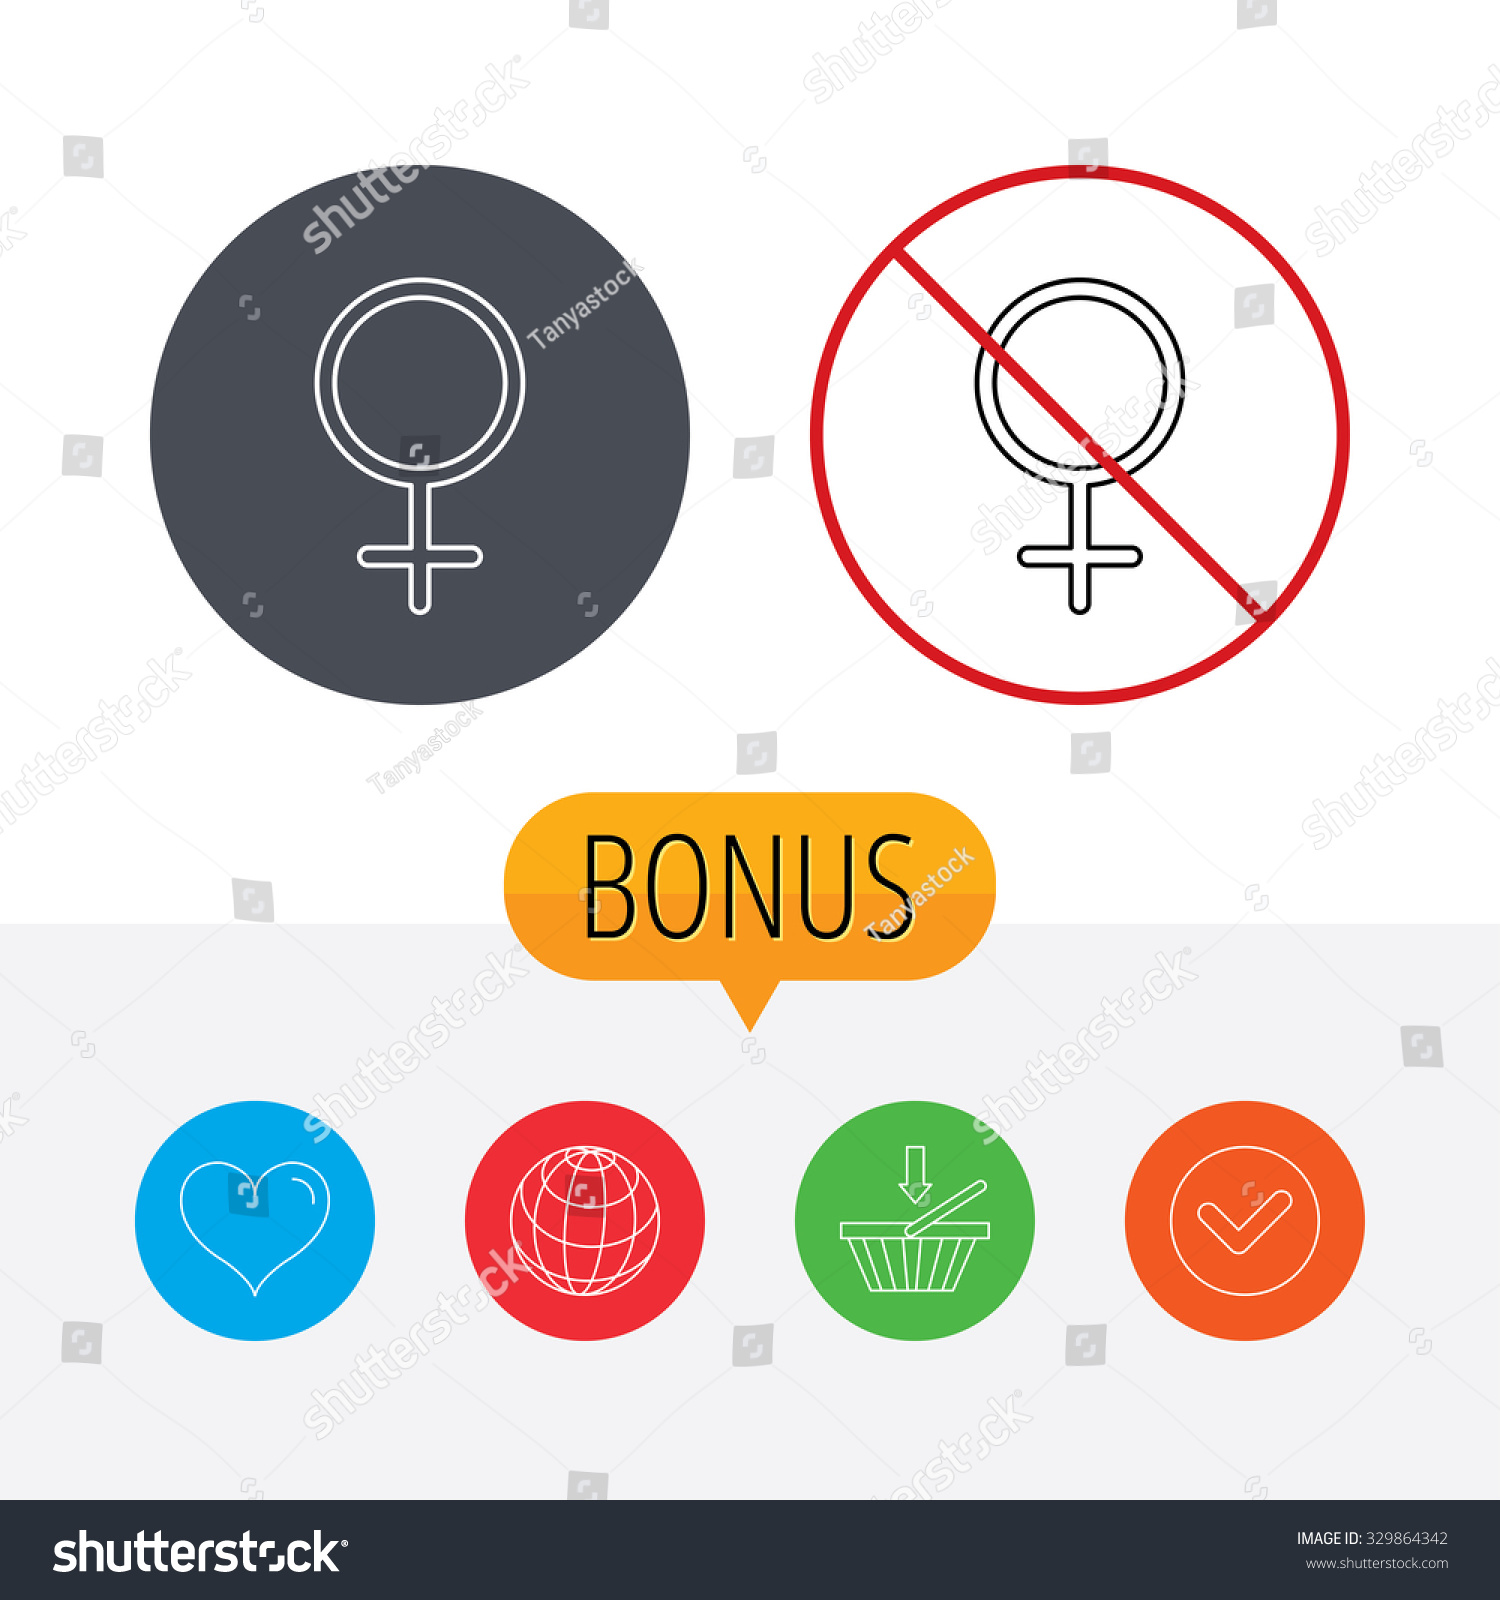 Female Icon Women Sex Sign Shopping Stock Vector Royalty Free 329864342 Shutterstock 1645